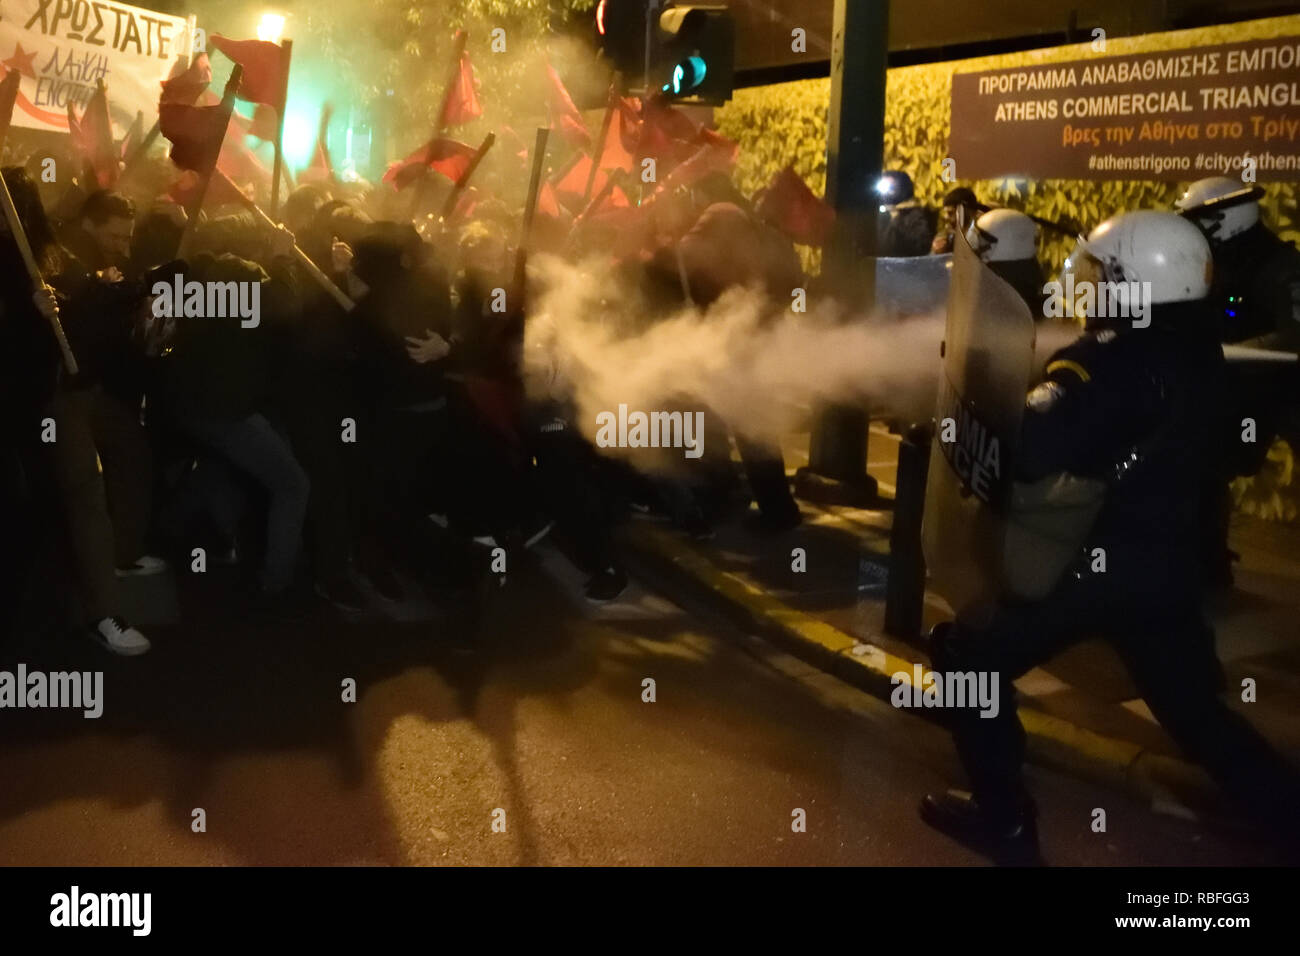 Athens, Greece. 10th Jan 2019. Protesters clash with riot police during the visit of the German Chancellor Angela Merkel in Athens, Greece. Credit: Nicolas Koutsokostas/Alamy Live News. Stock Photo